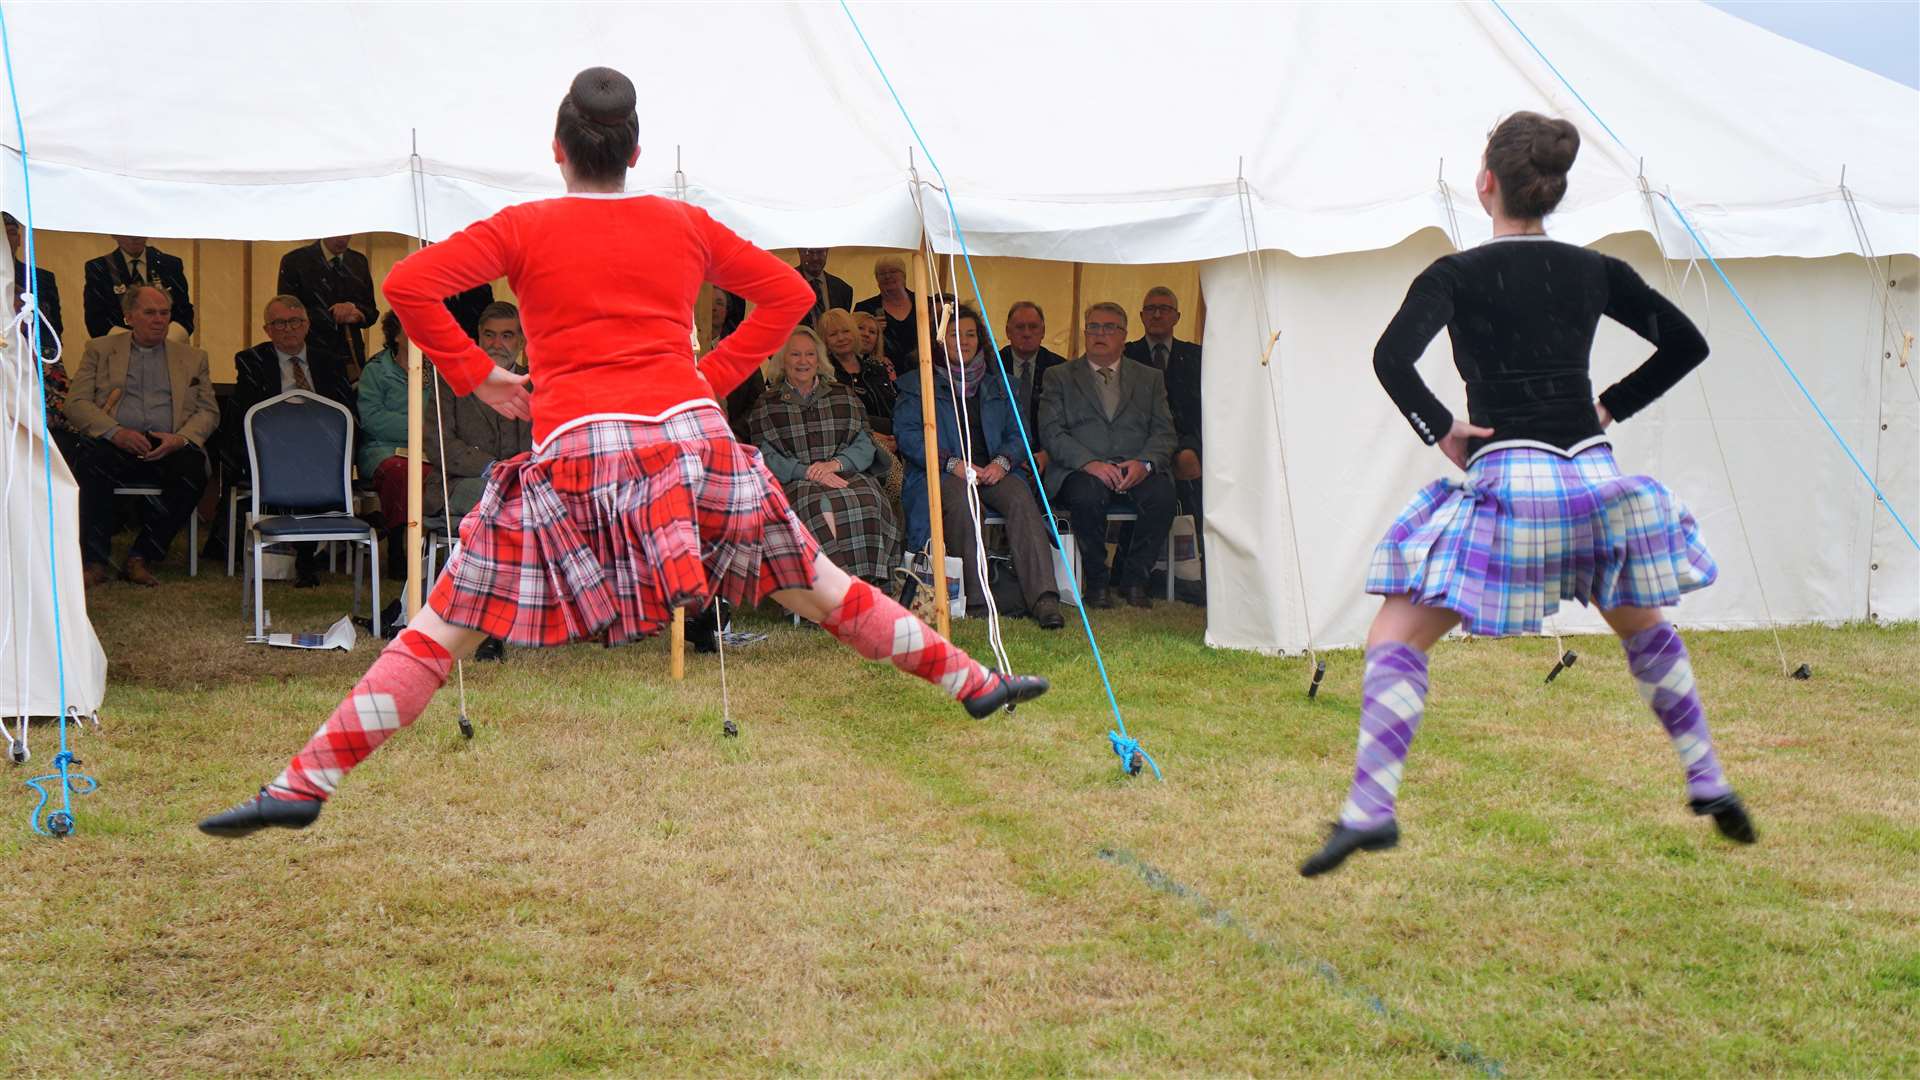 Rachel May and Charley Sutherland put on a dance display for HRH and the royal party. The dance was a choreography specially commissioned for the 50th anniversary of the Mey Highland Games. Picture: DGS